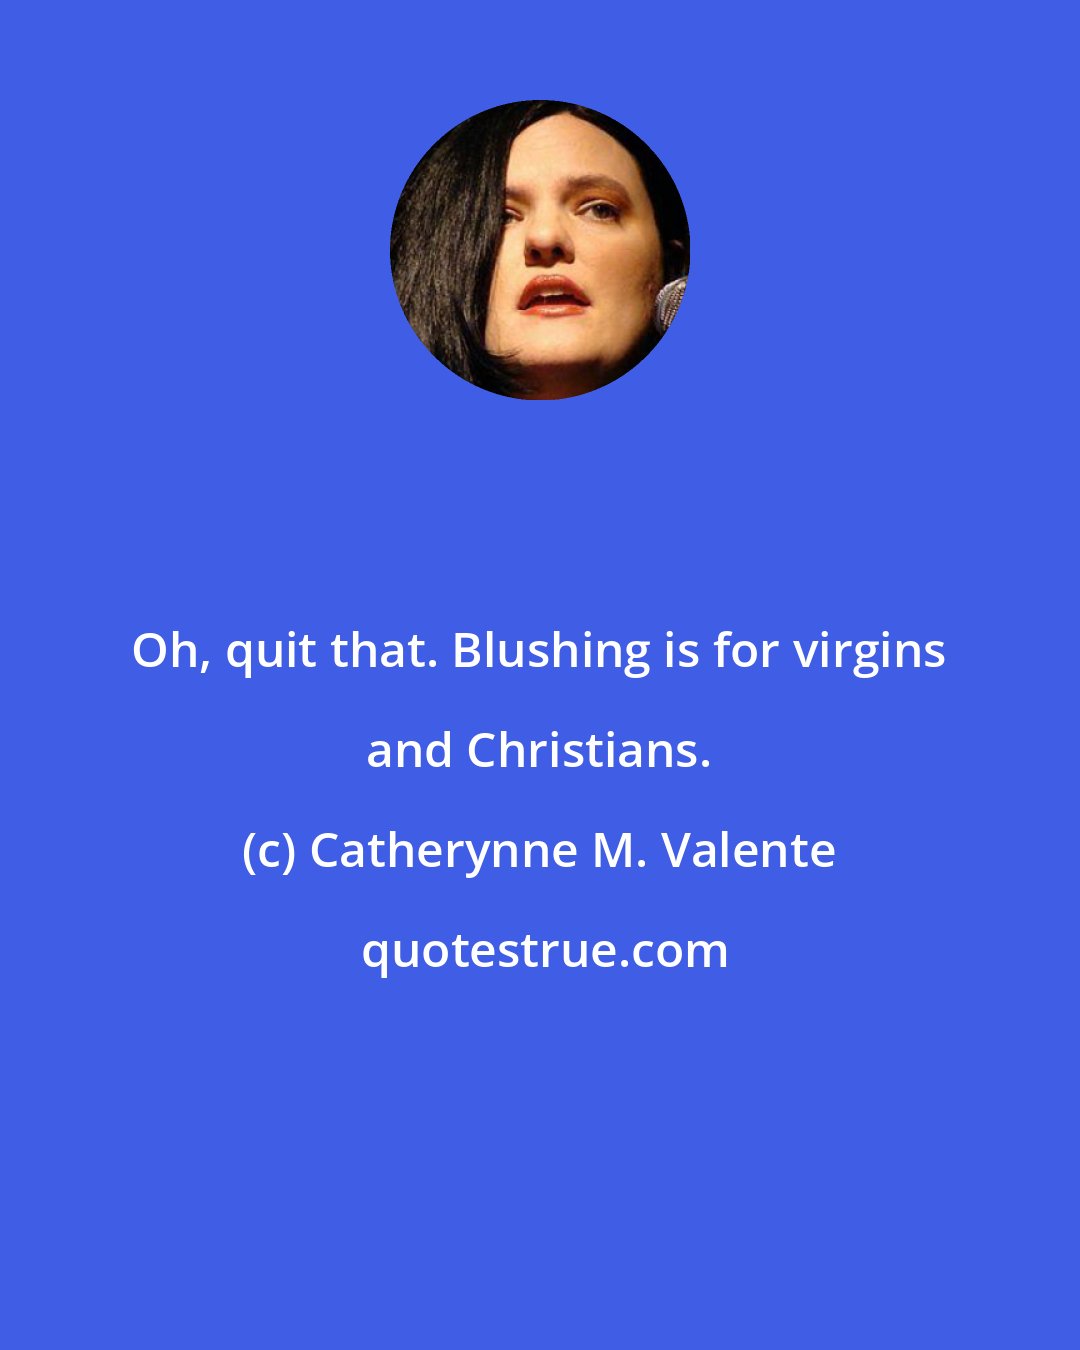 Catherynne M. Valente: Oh, quit that. Blushing is for virgins and Christians.